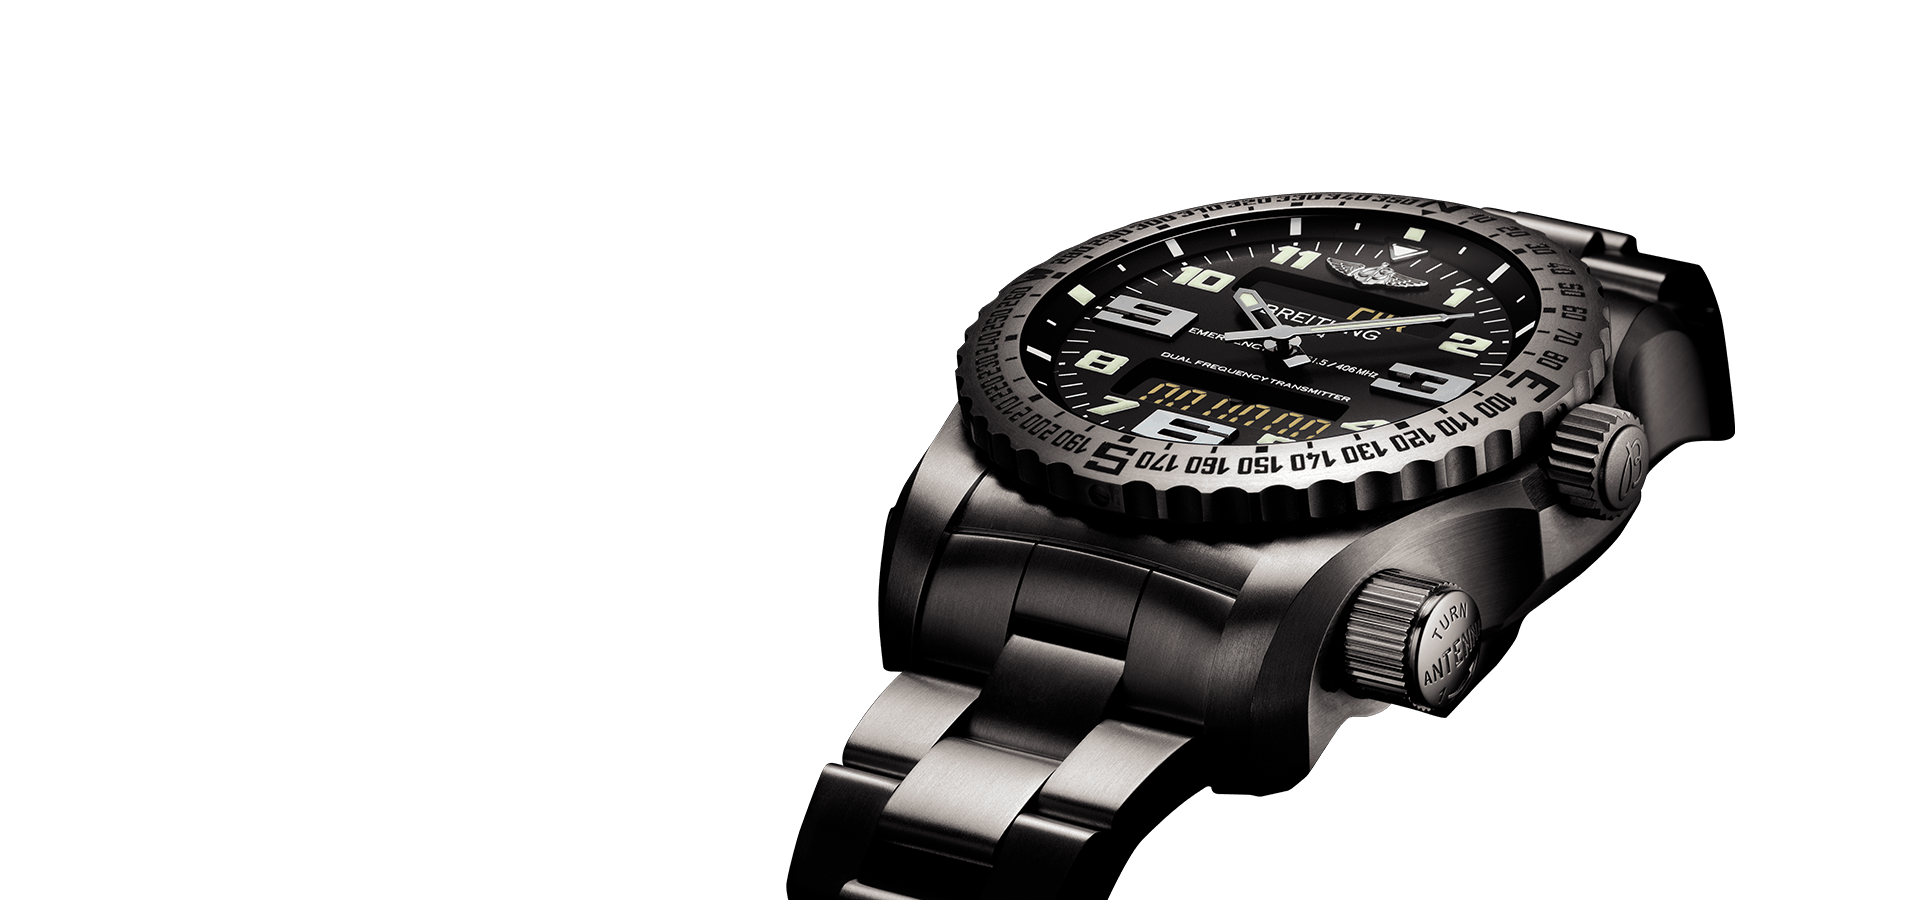 Breitling Super Ocean Heritage Chronograph 44 mm Automatic A13313161C1S1breitling Super Ocean Heritage Chronograph 44, A13313161/C1S1, Undressed, B-P